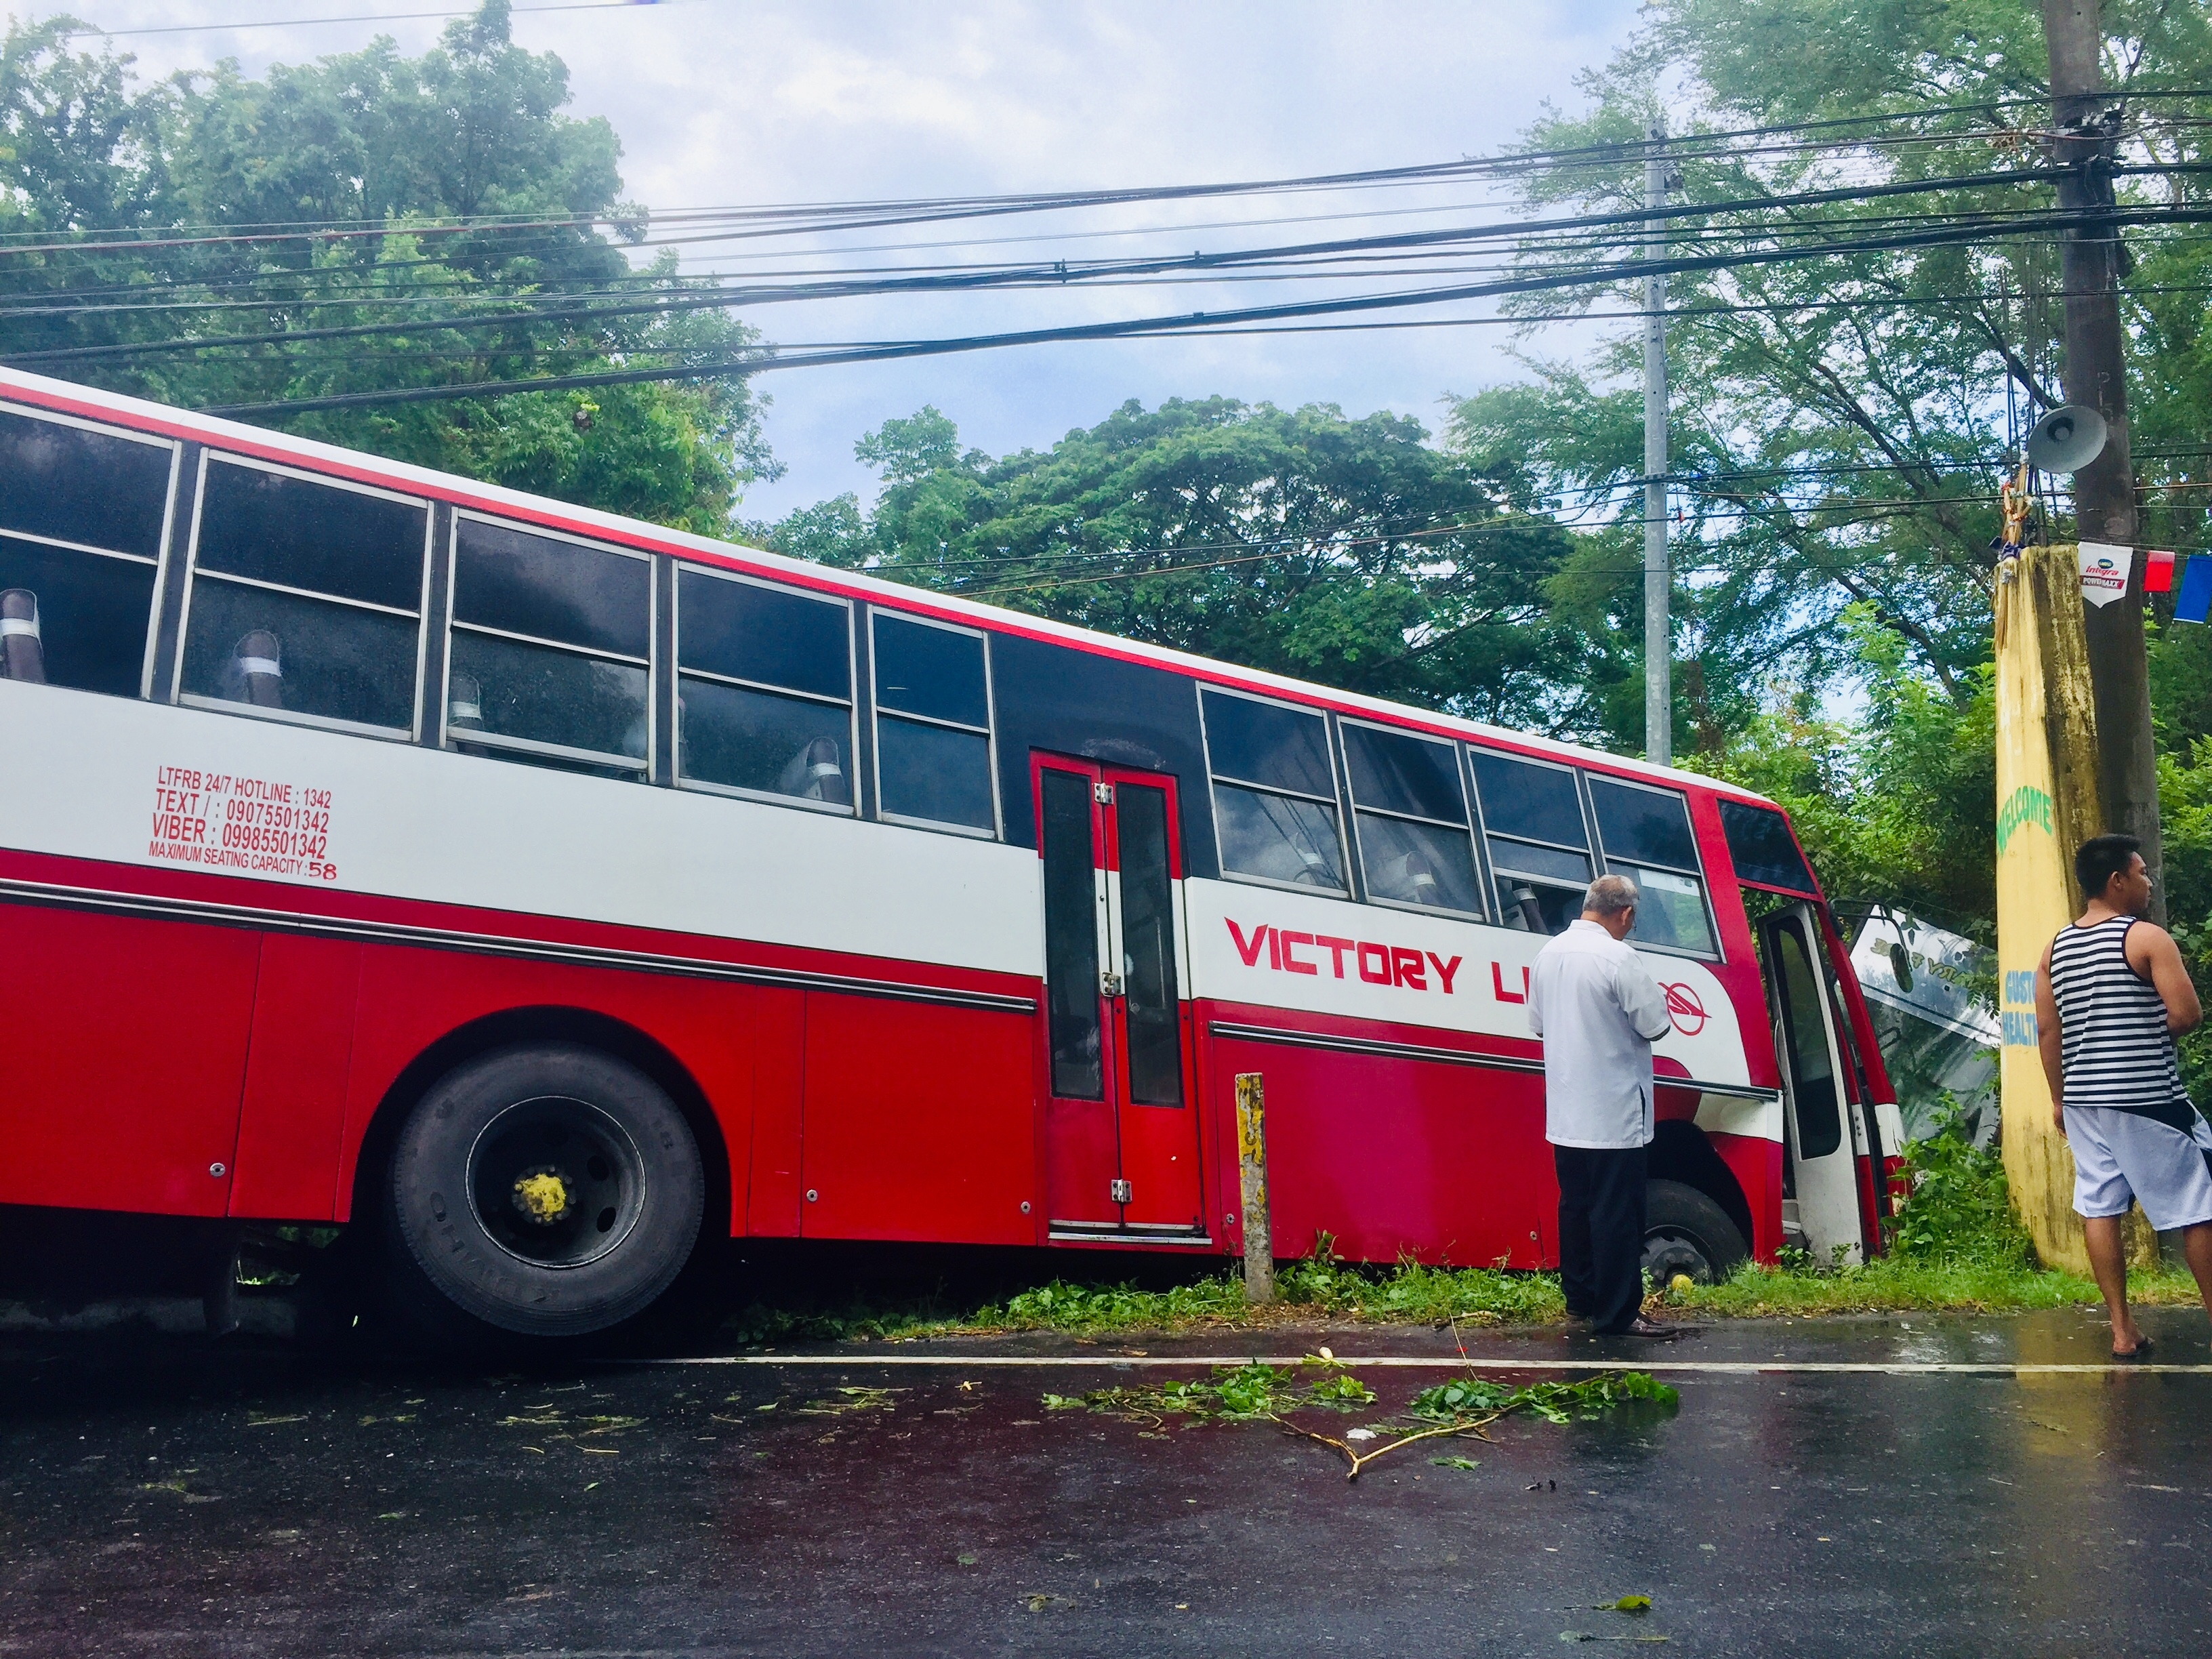 A slippery road caused this passenger bus to swerve and fall into the road gutter along the National Road in Barangay Antipolo, San Antonio, Zambales, injuring the driver and 19 passengers on Saturday. (Photo by Joanna Rose Aglibot)